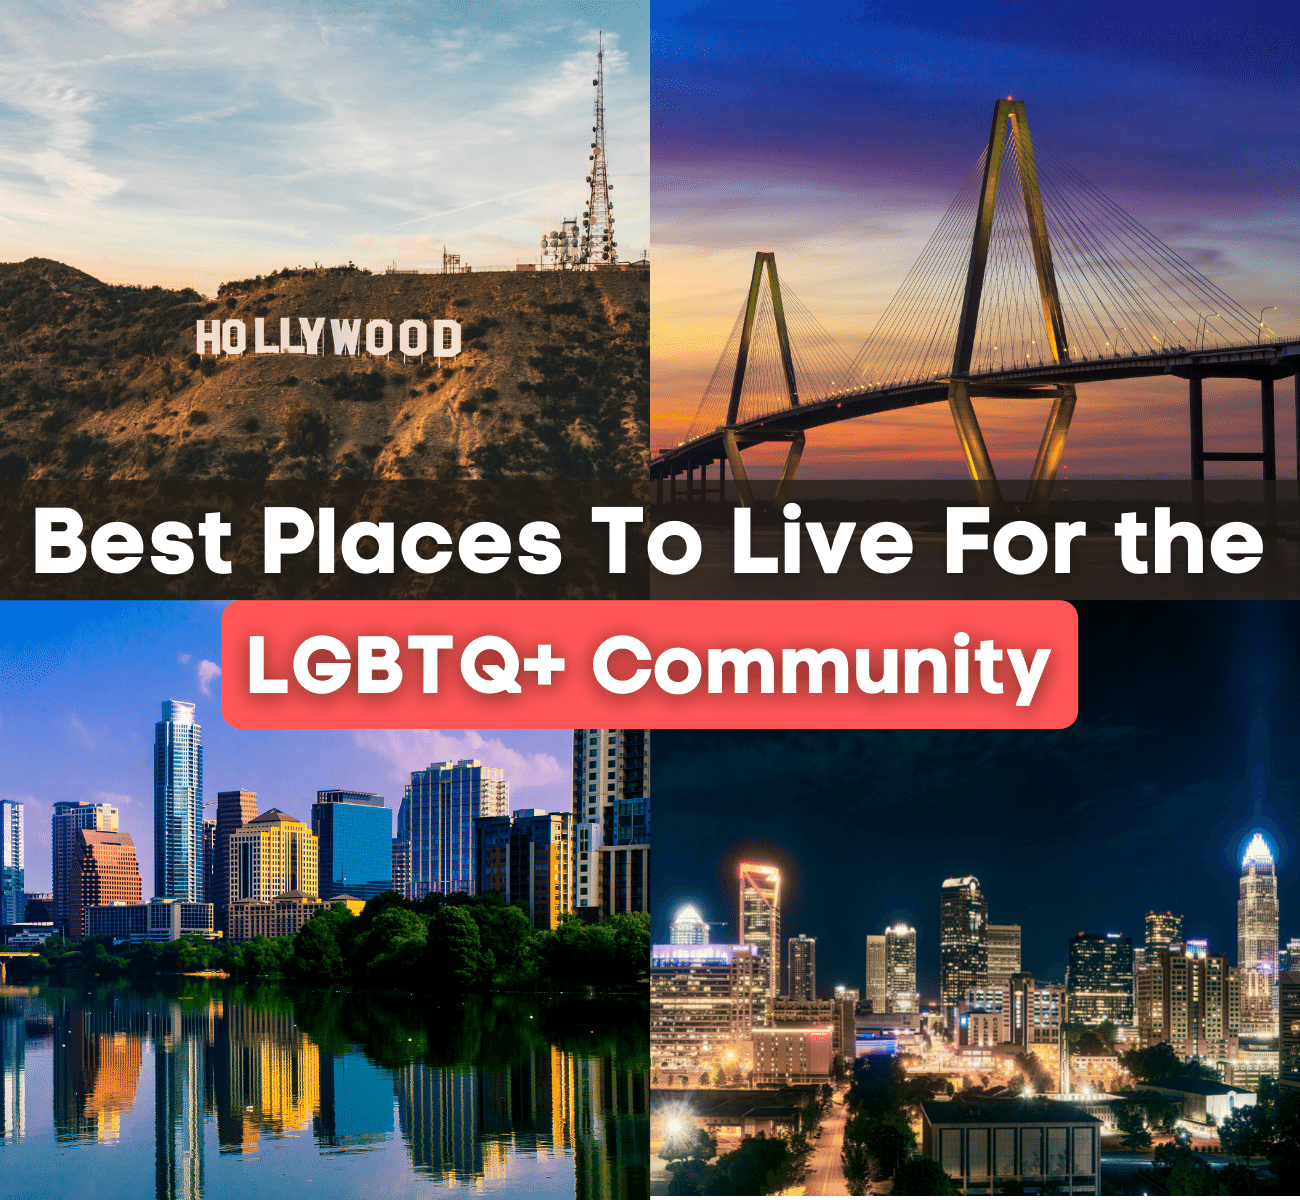 Best Cities and Places to live for the LGBTQ+ Community